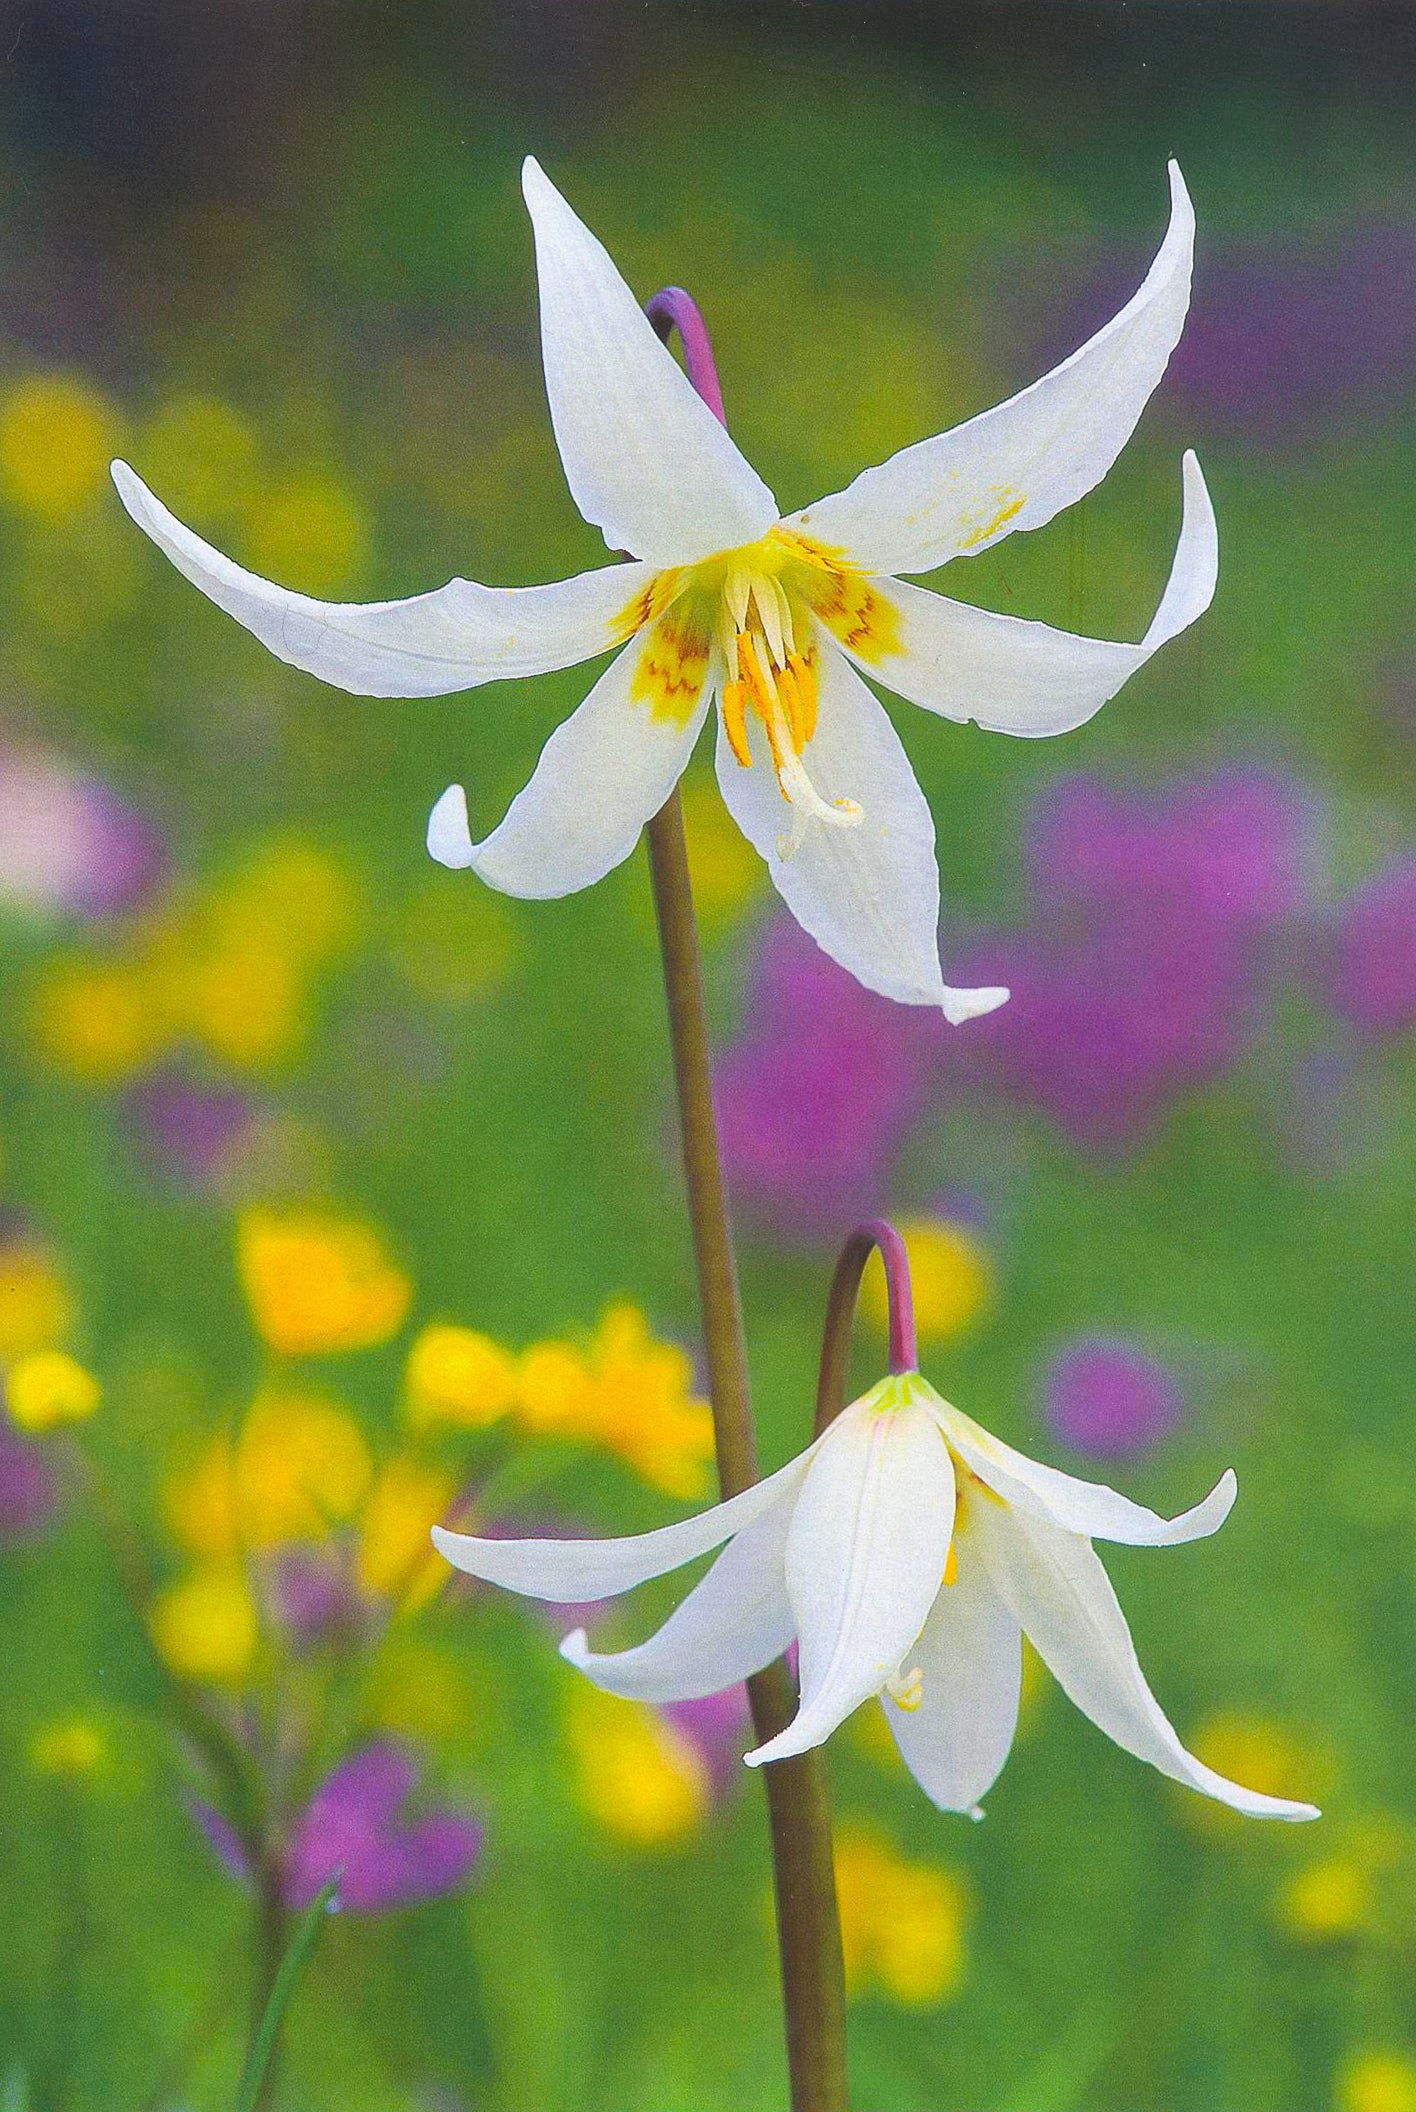 Two wide open white fawn lily blossoms.